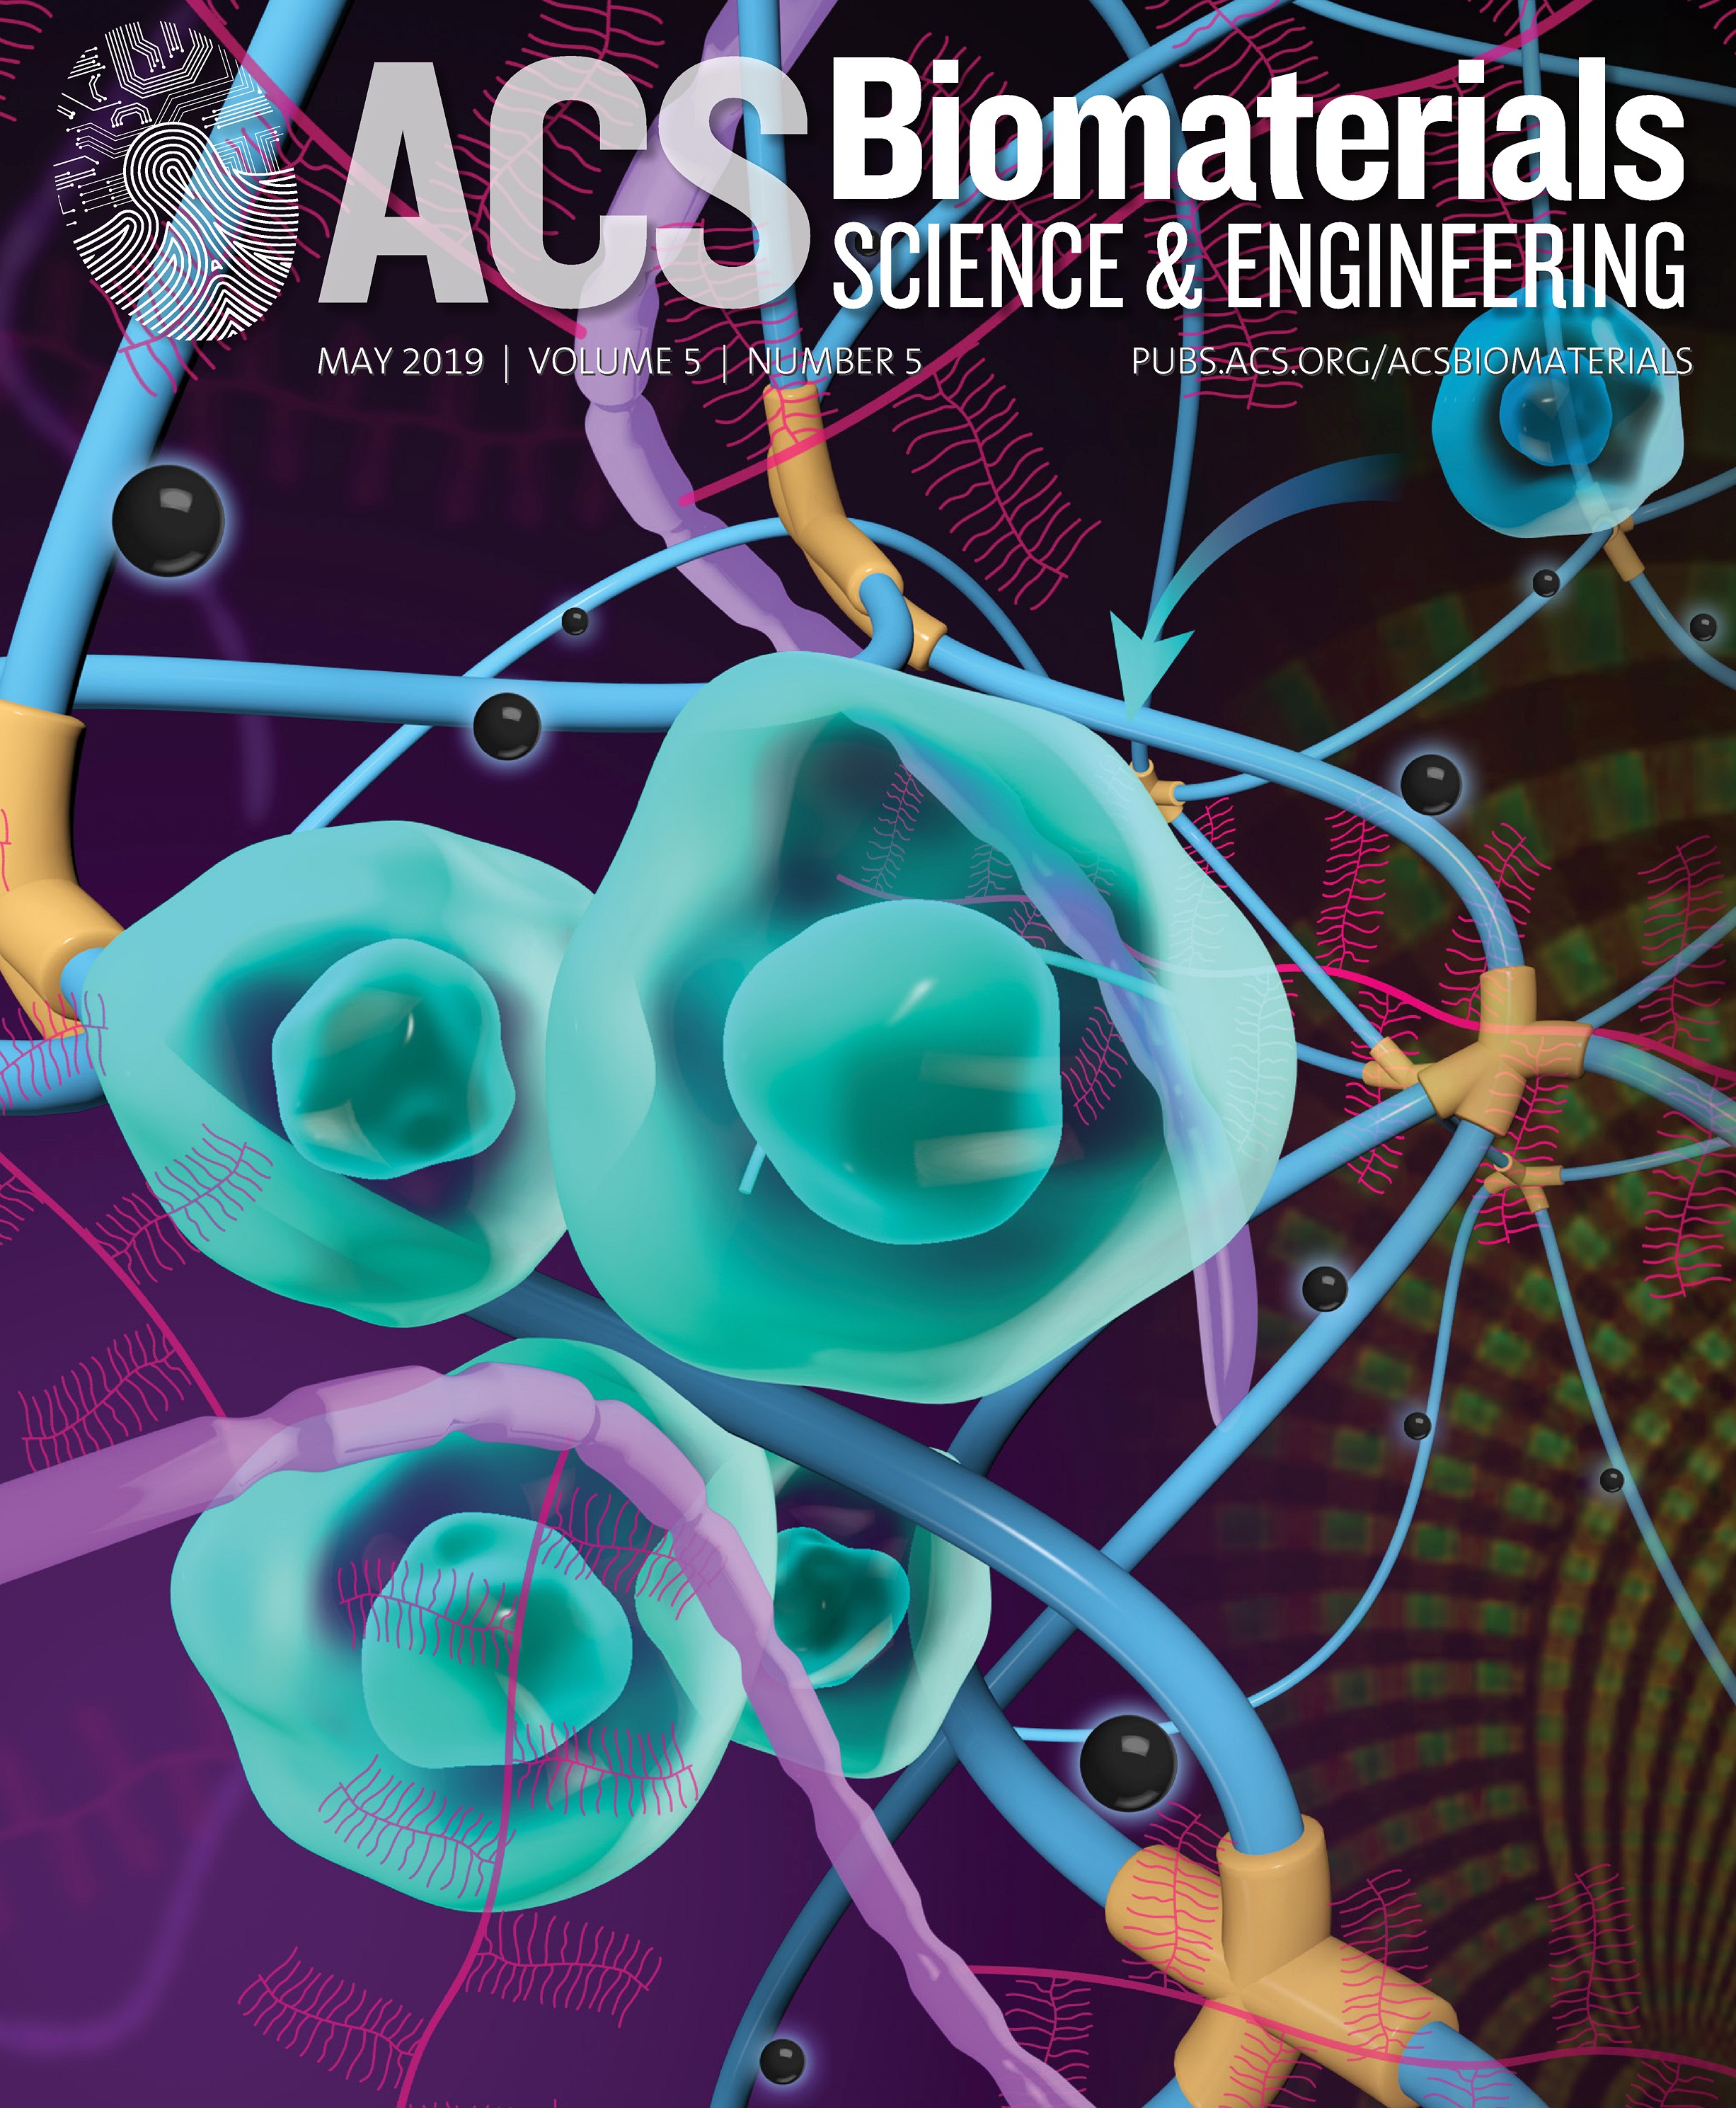 Research Creative Illustration, Journal Cover  Art Design, ACS Biomaterials Science & Engineering